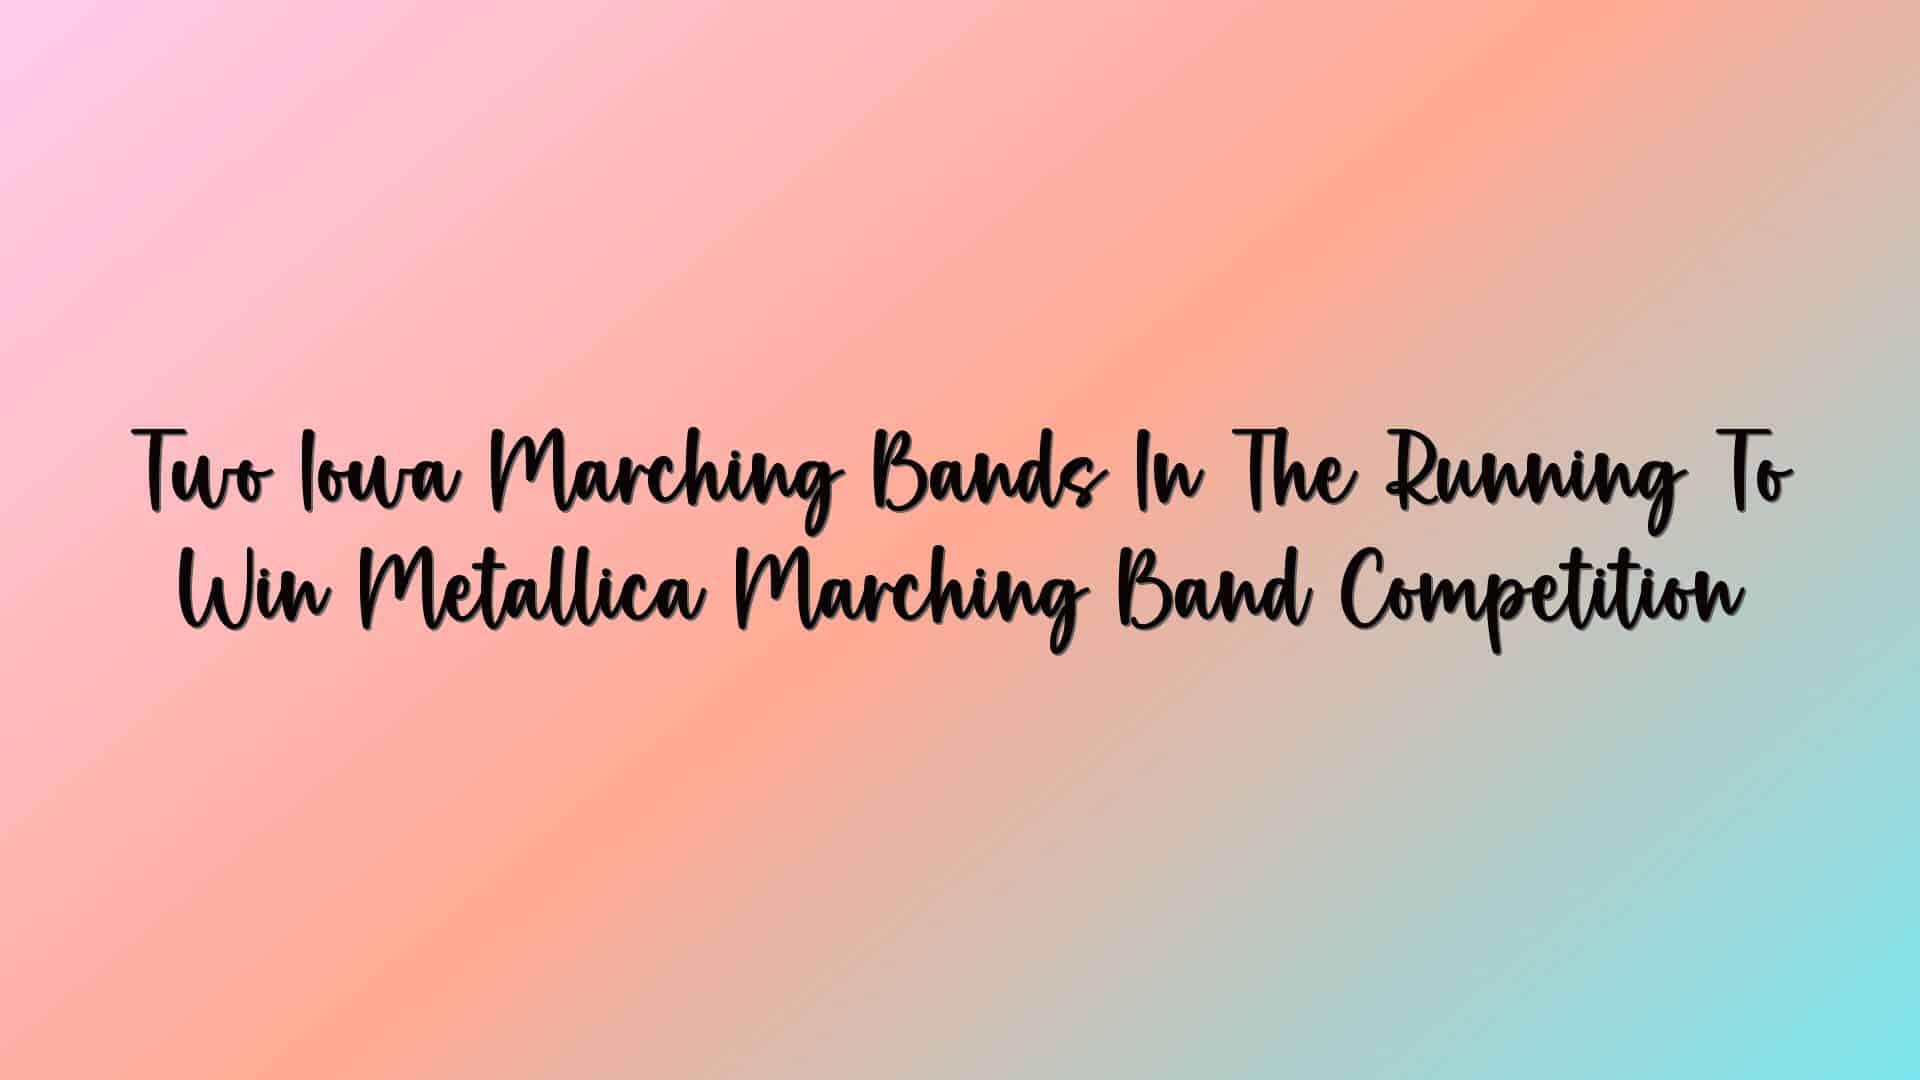 Two Iowa Marching Bands In The Running To Win Metallica Marching Band Competition